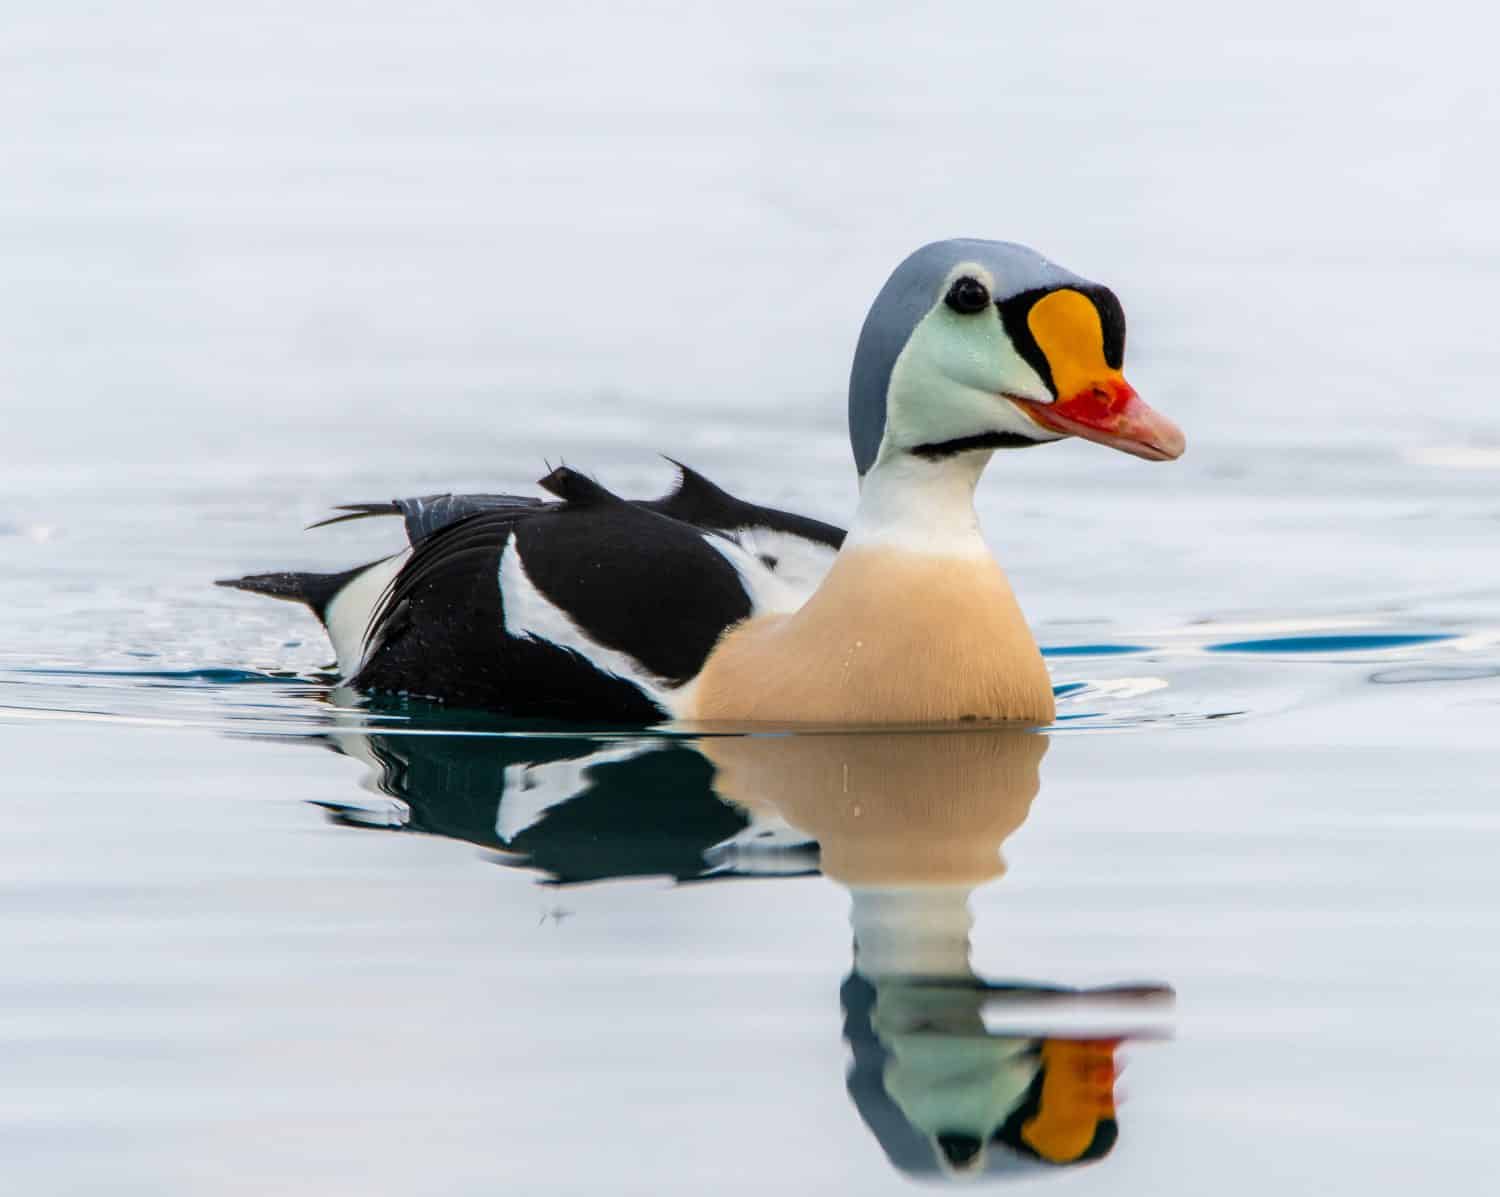 Swimming king eider at the harbour of båtsfjord, Norway